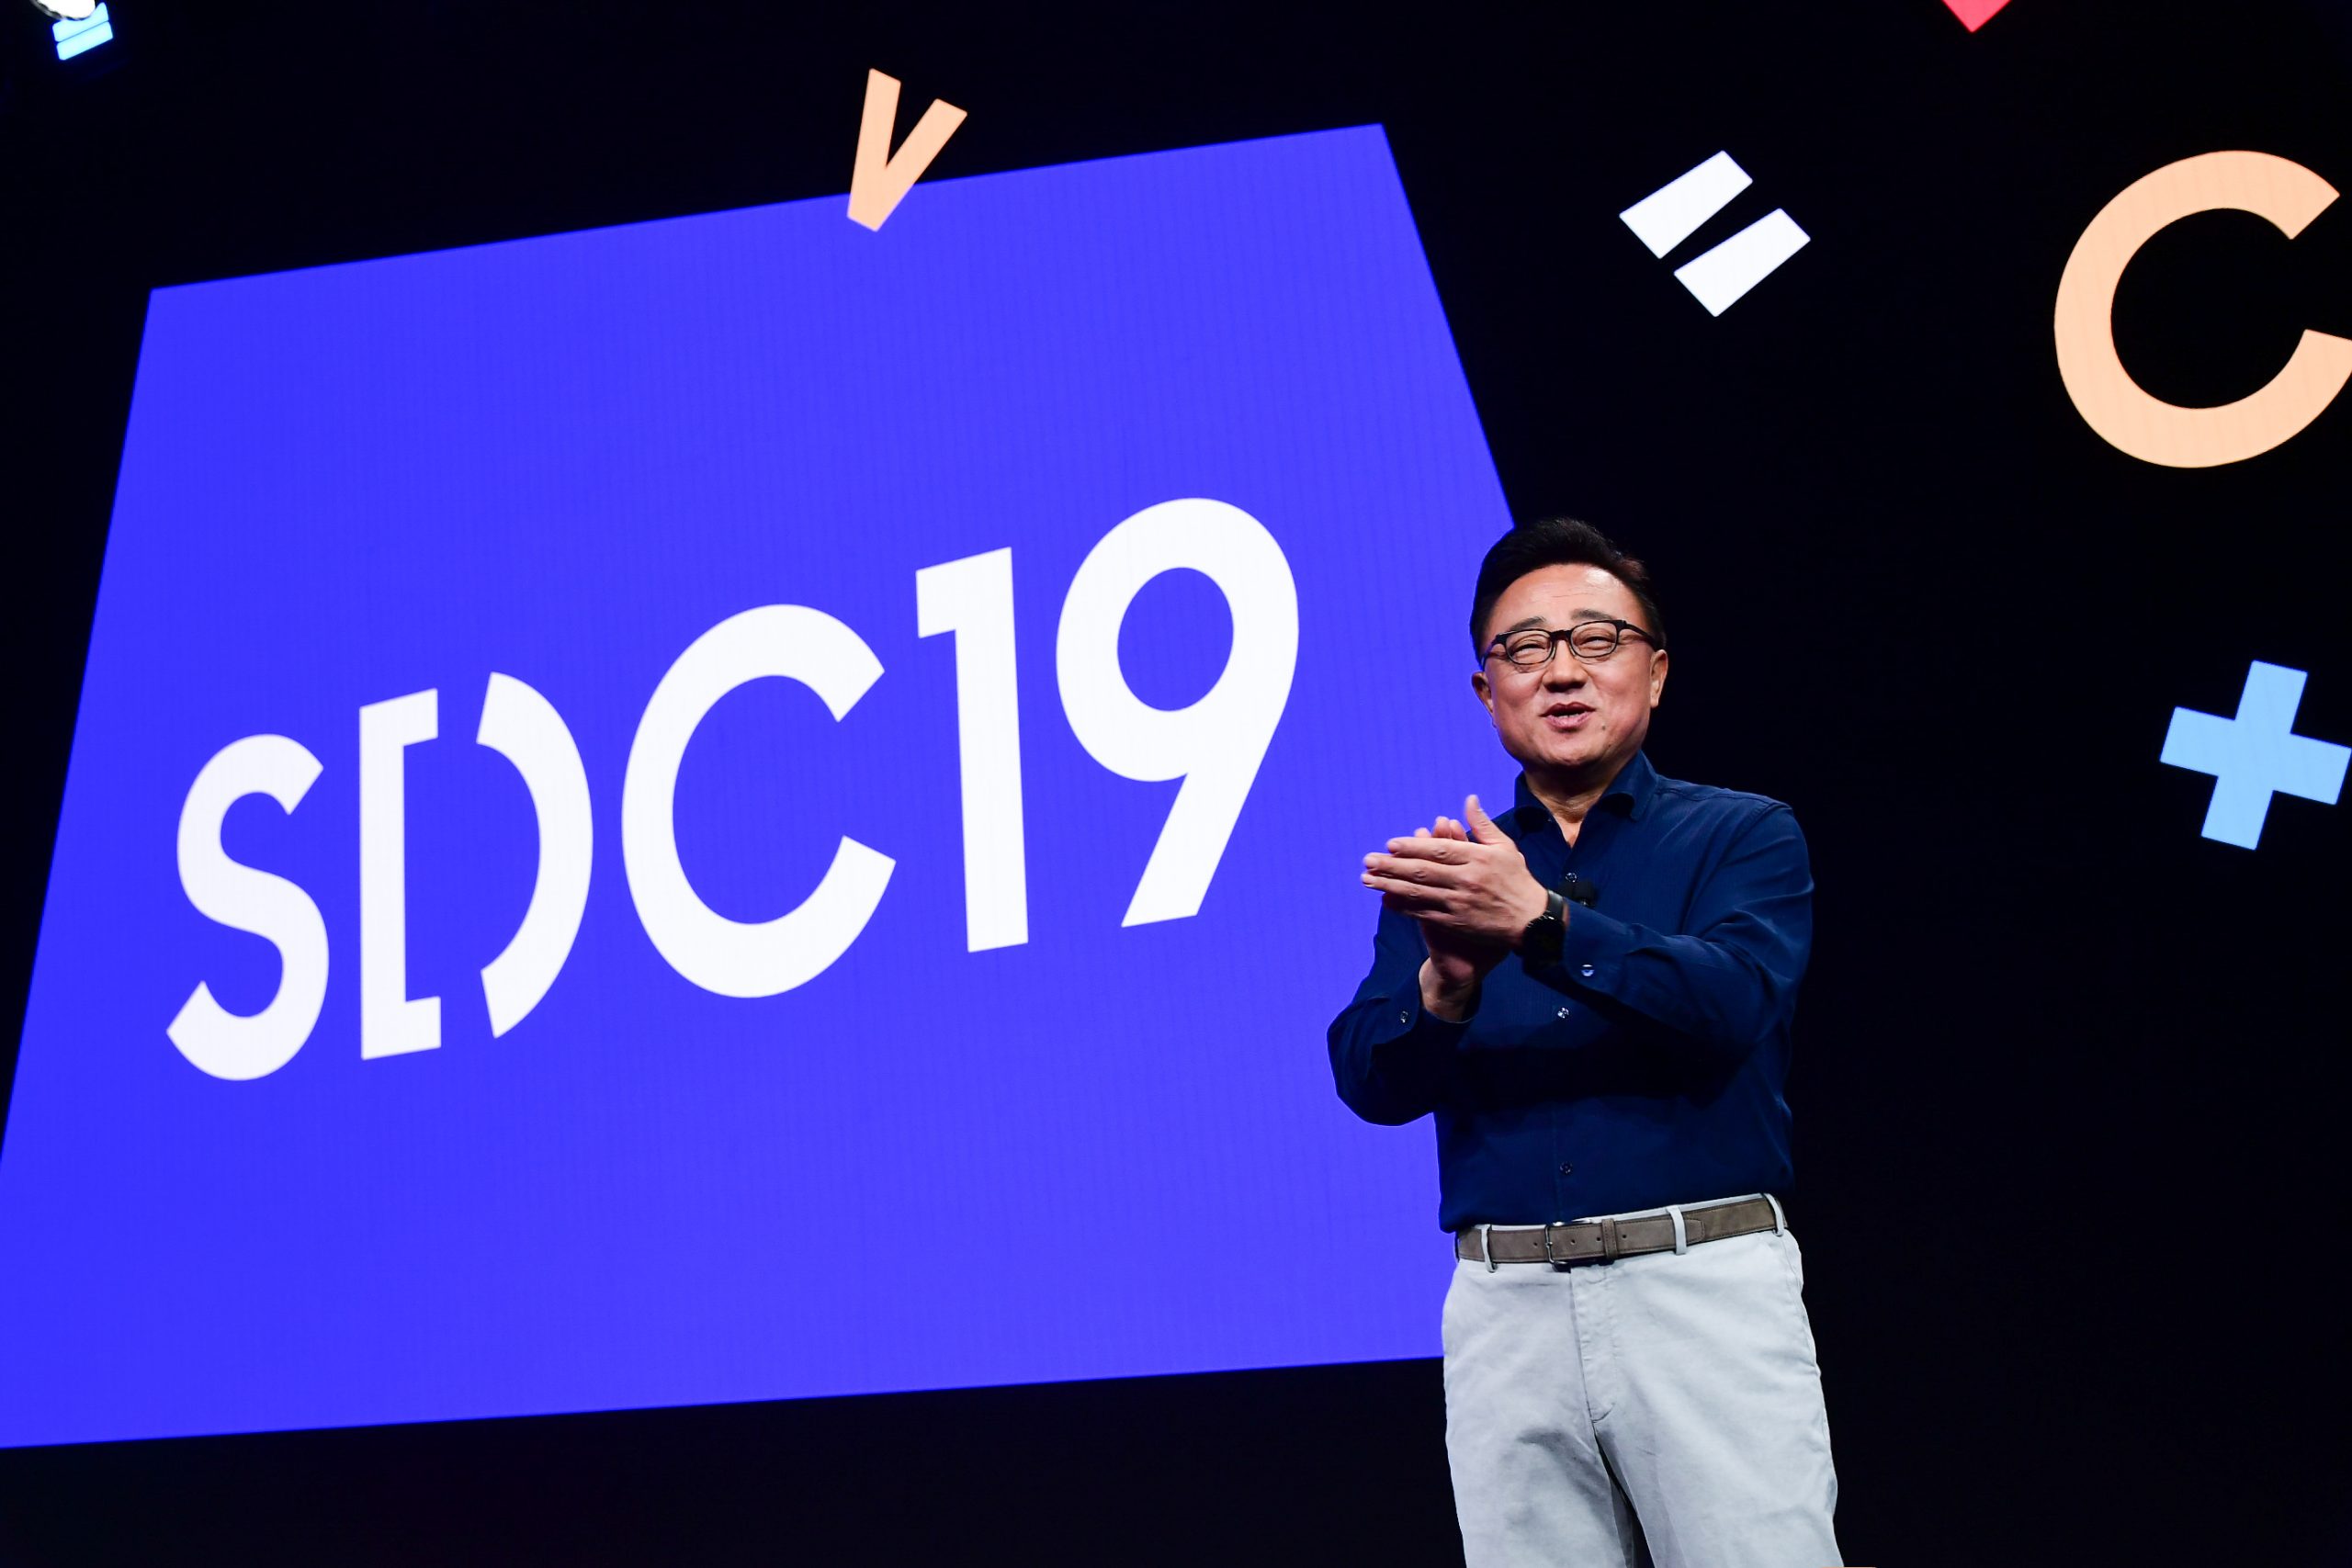 SDC19: Samsung Advances Experience Innovation, in Collaboration with Partners and Developers